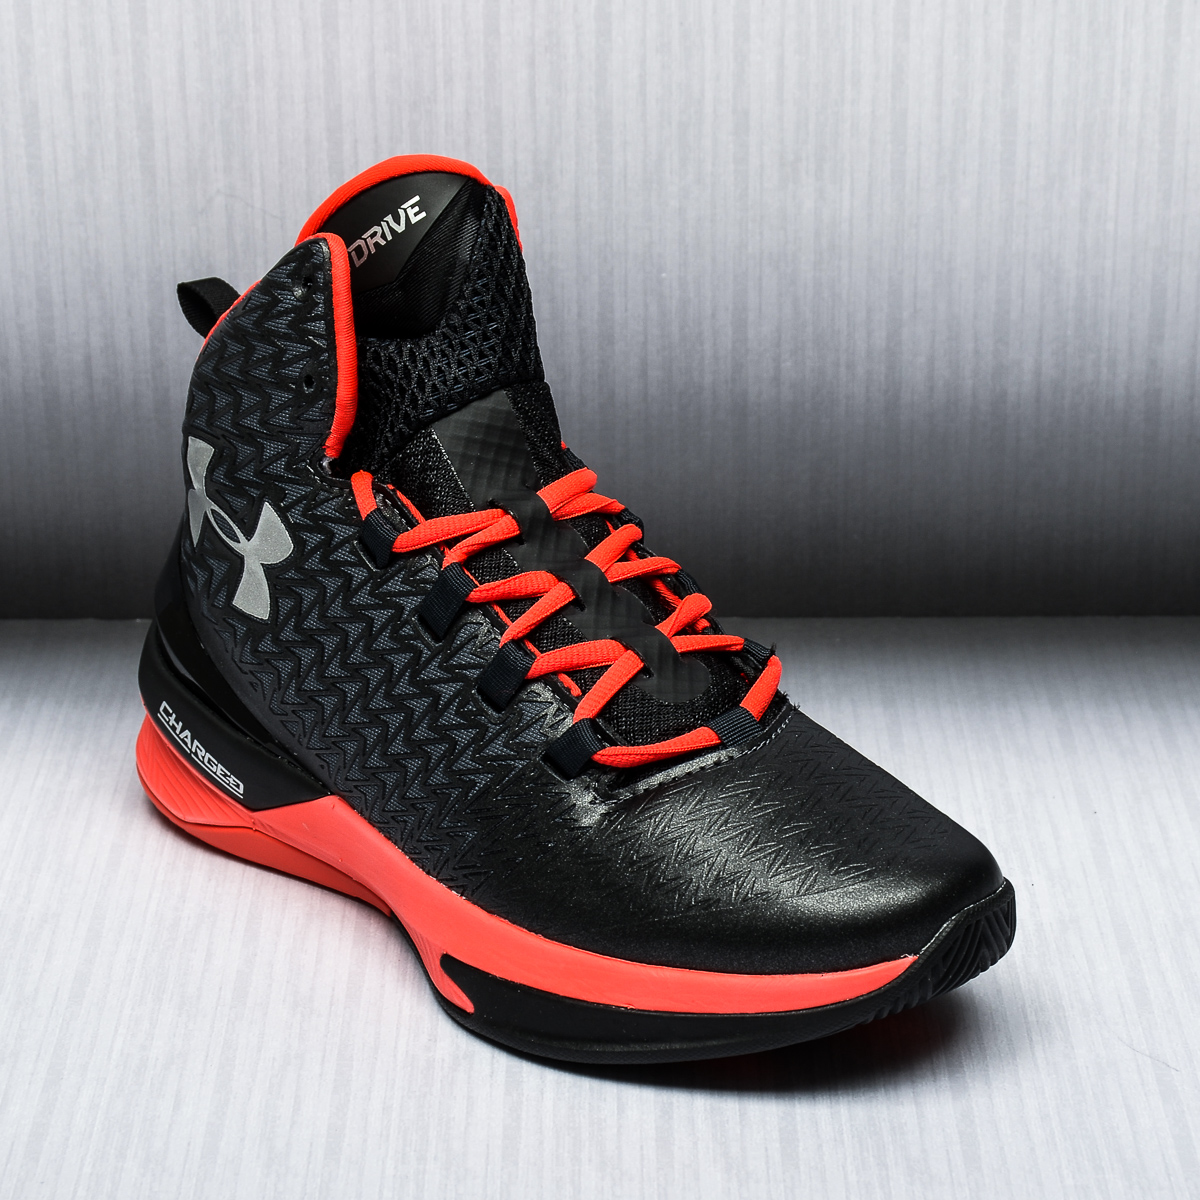 Cheap under armour shoes basketball Buy 